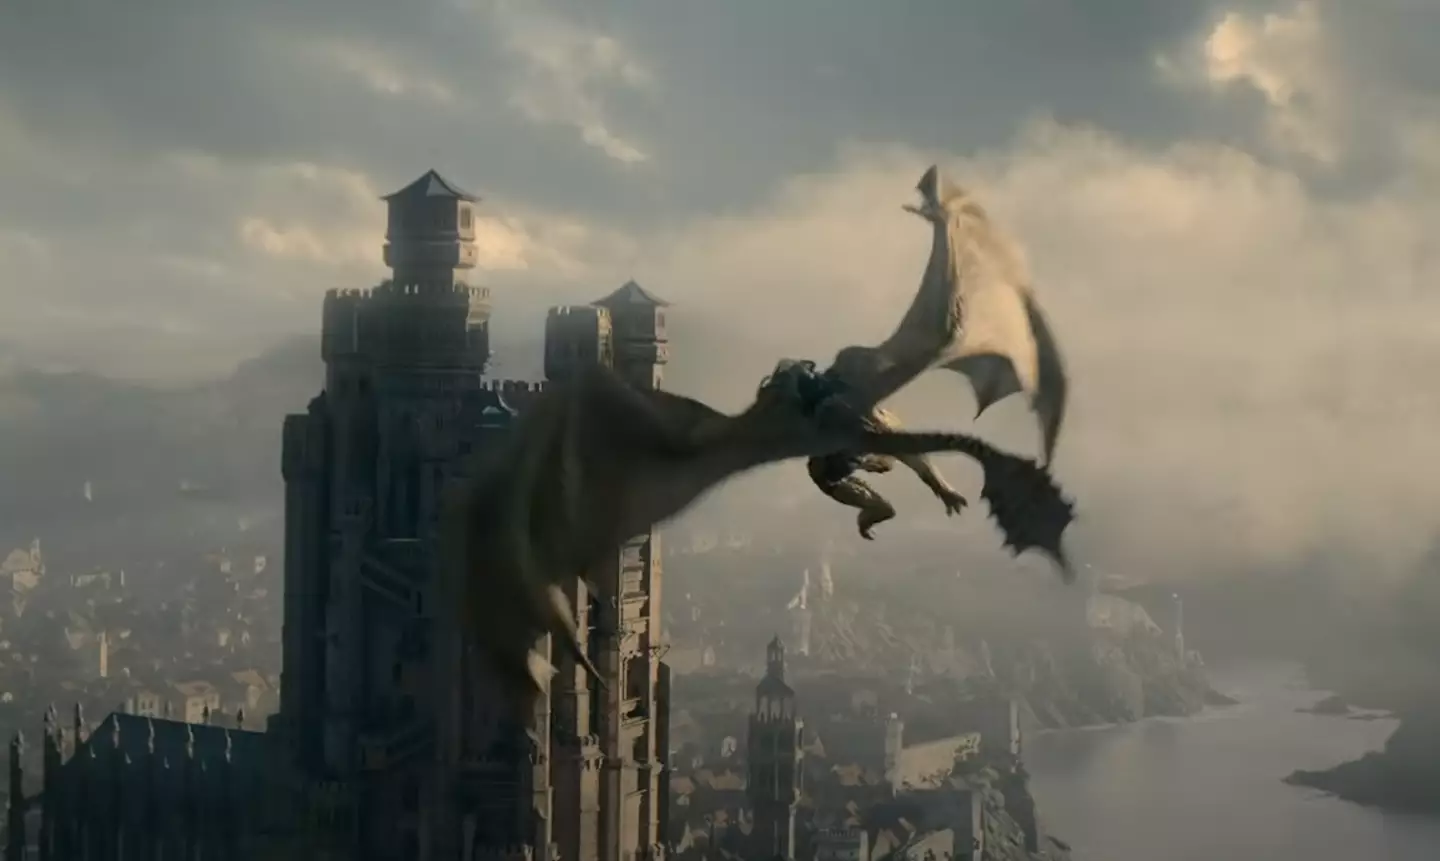 House of the Dragon is set to be released later this year.